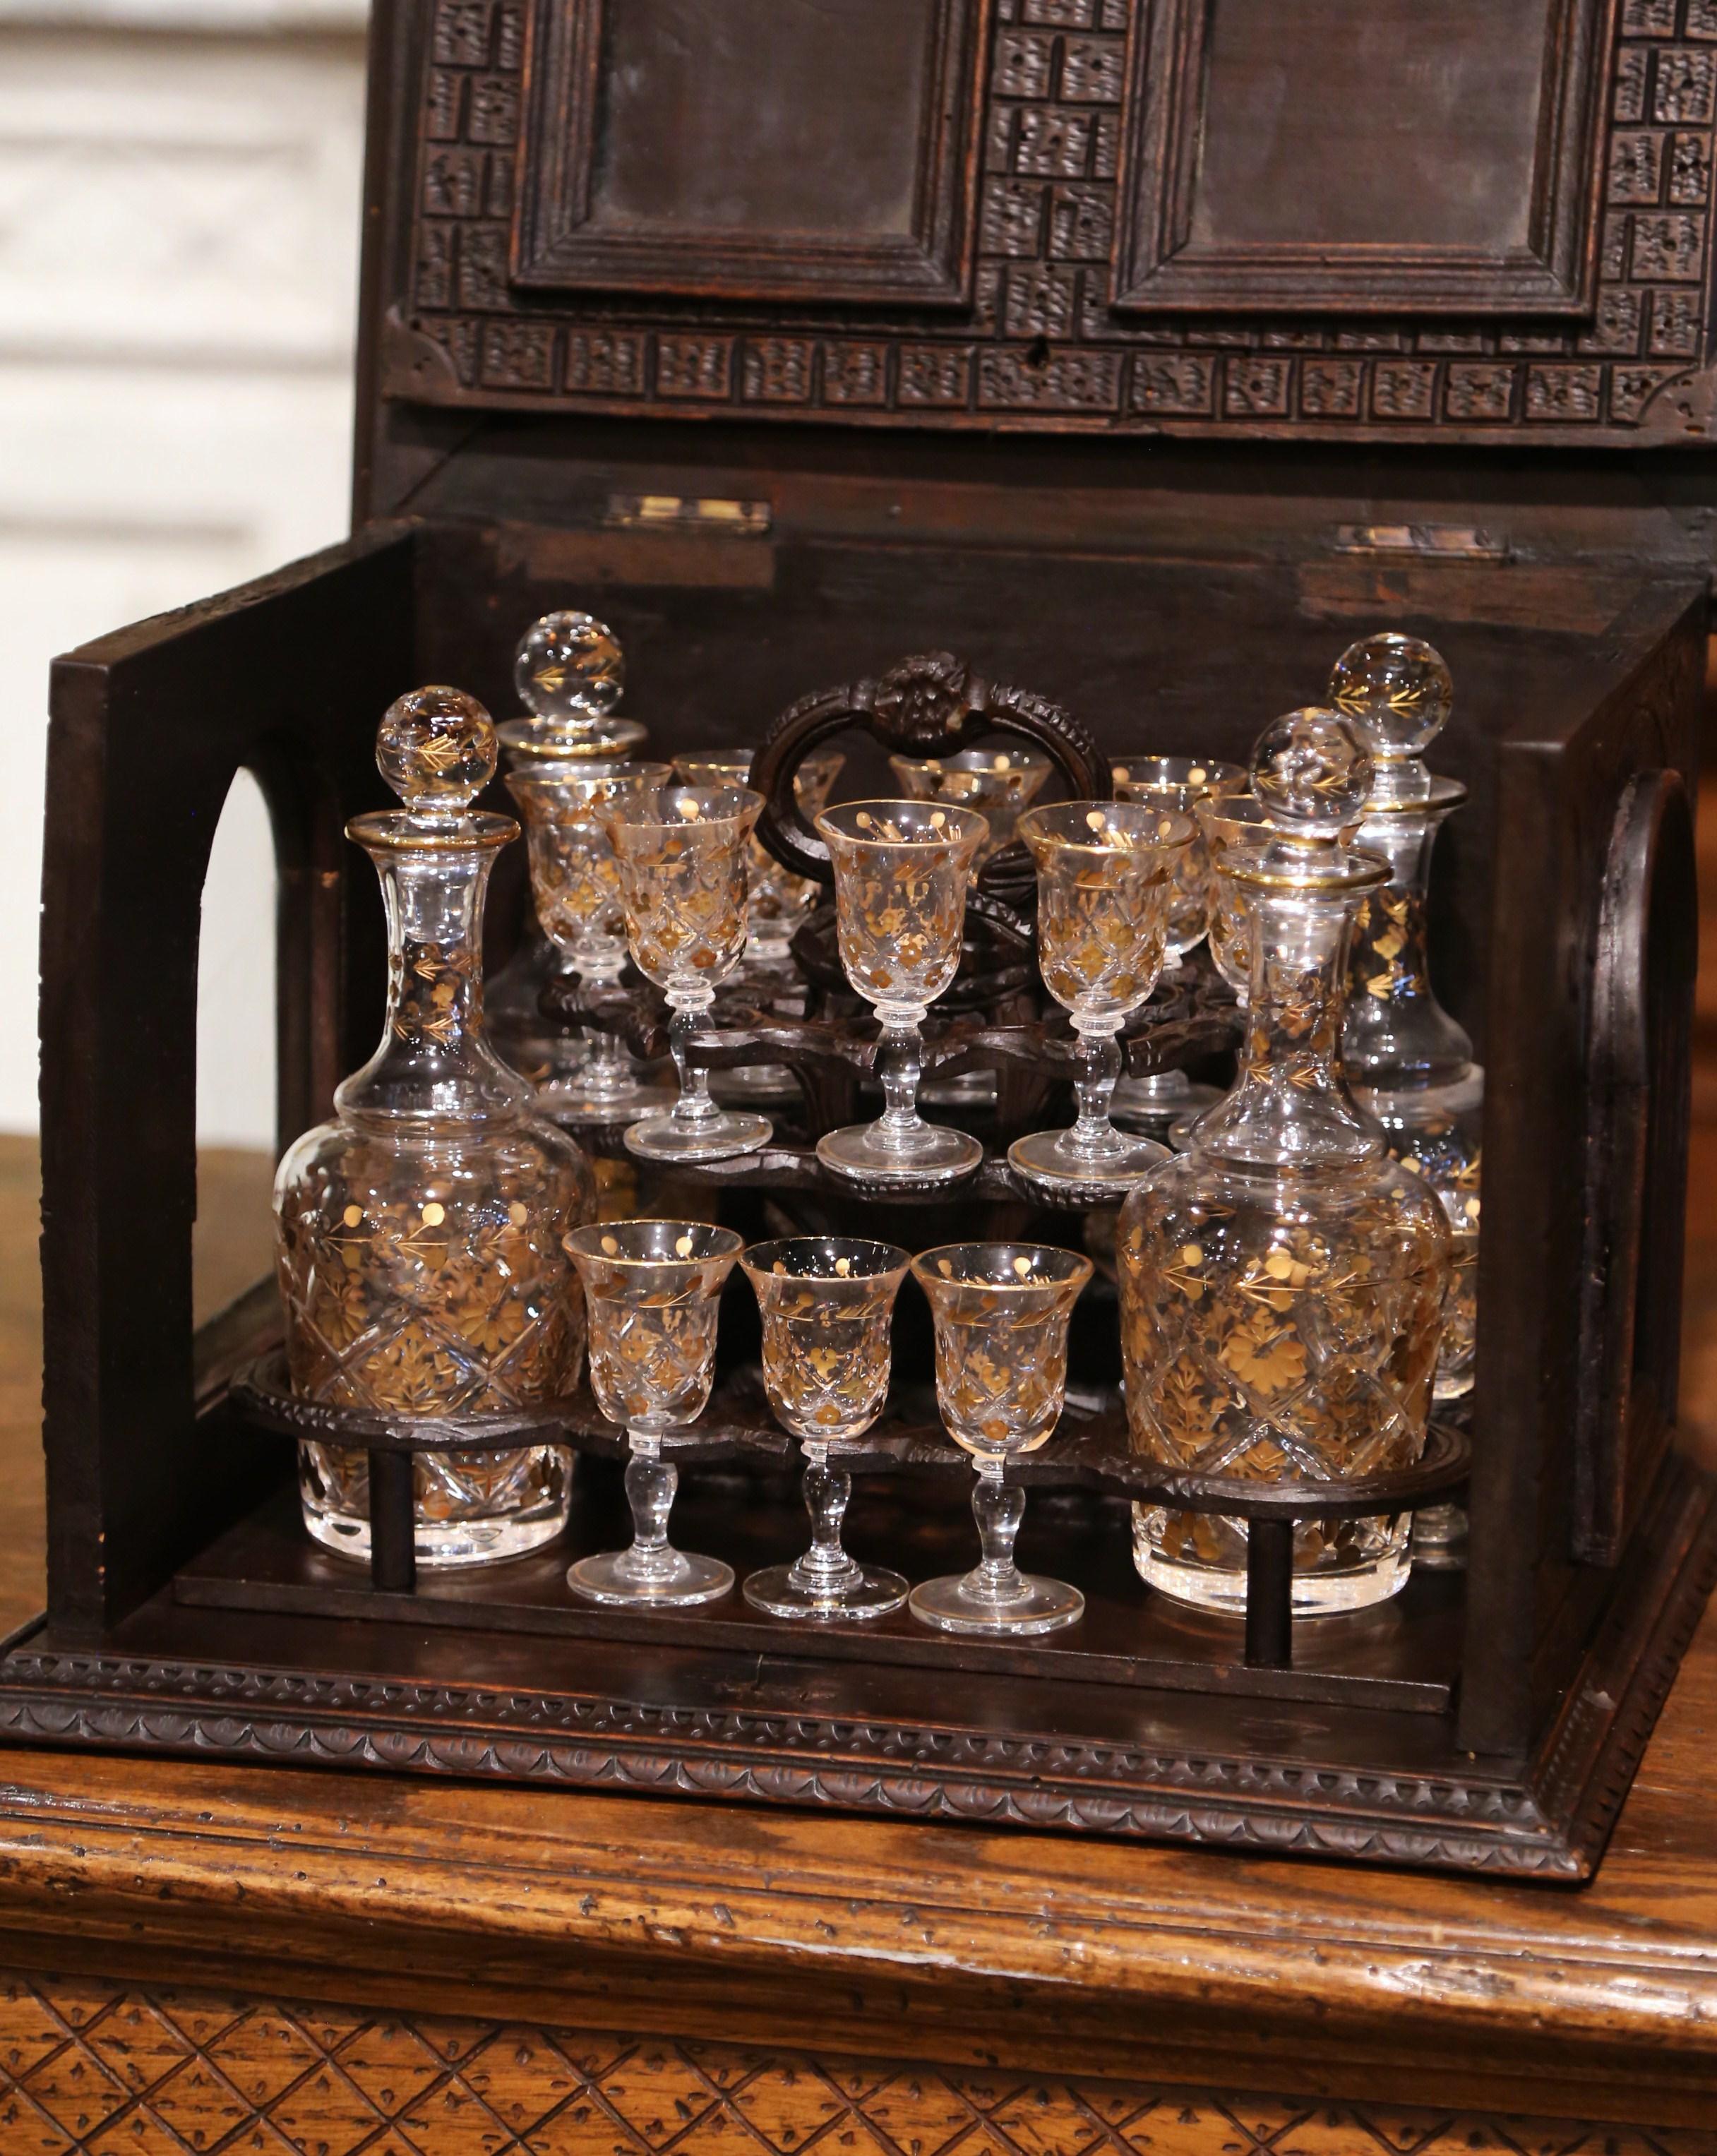 Create an elegant bar area with this antique 